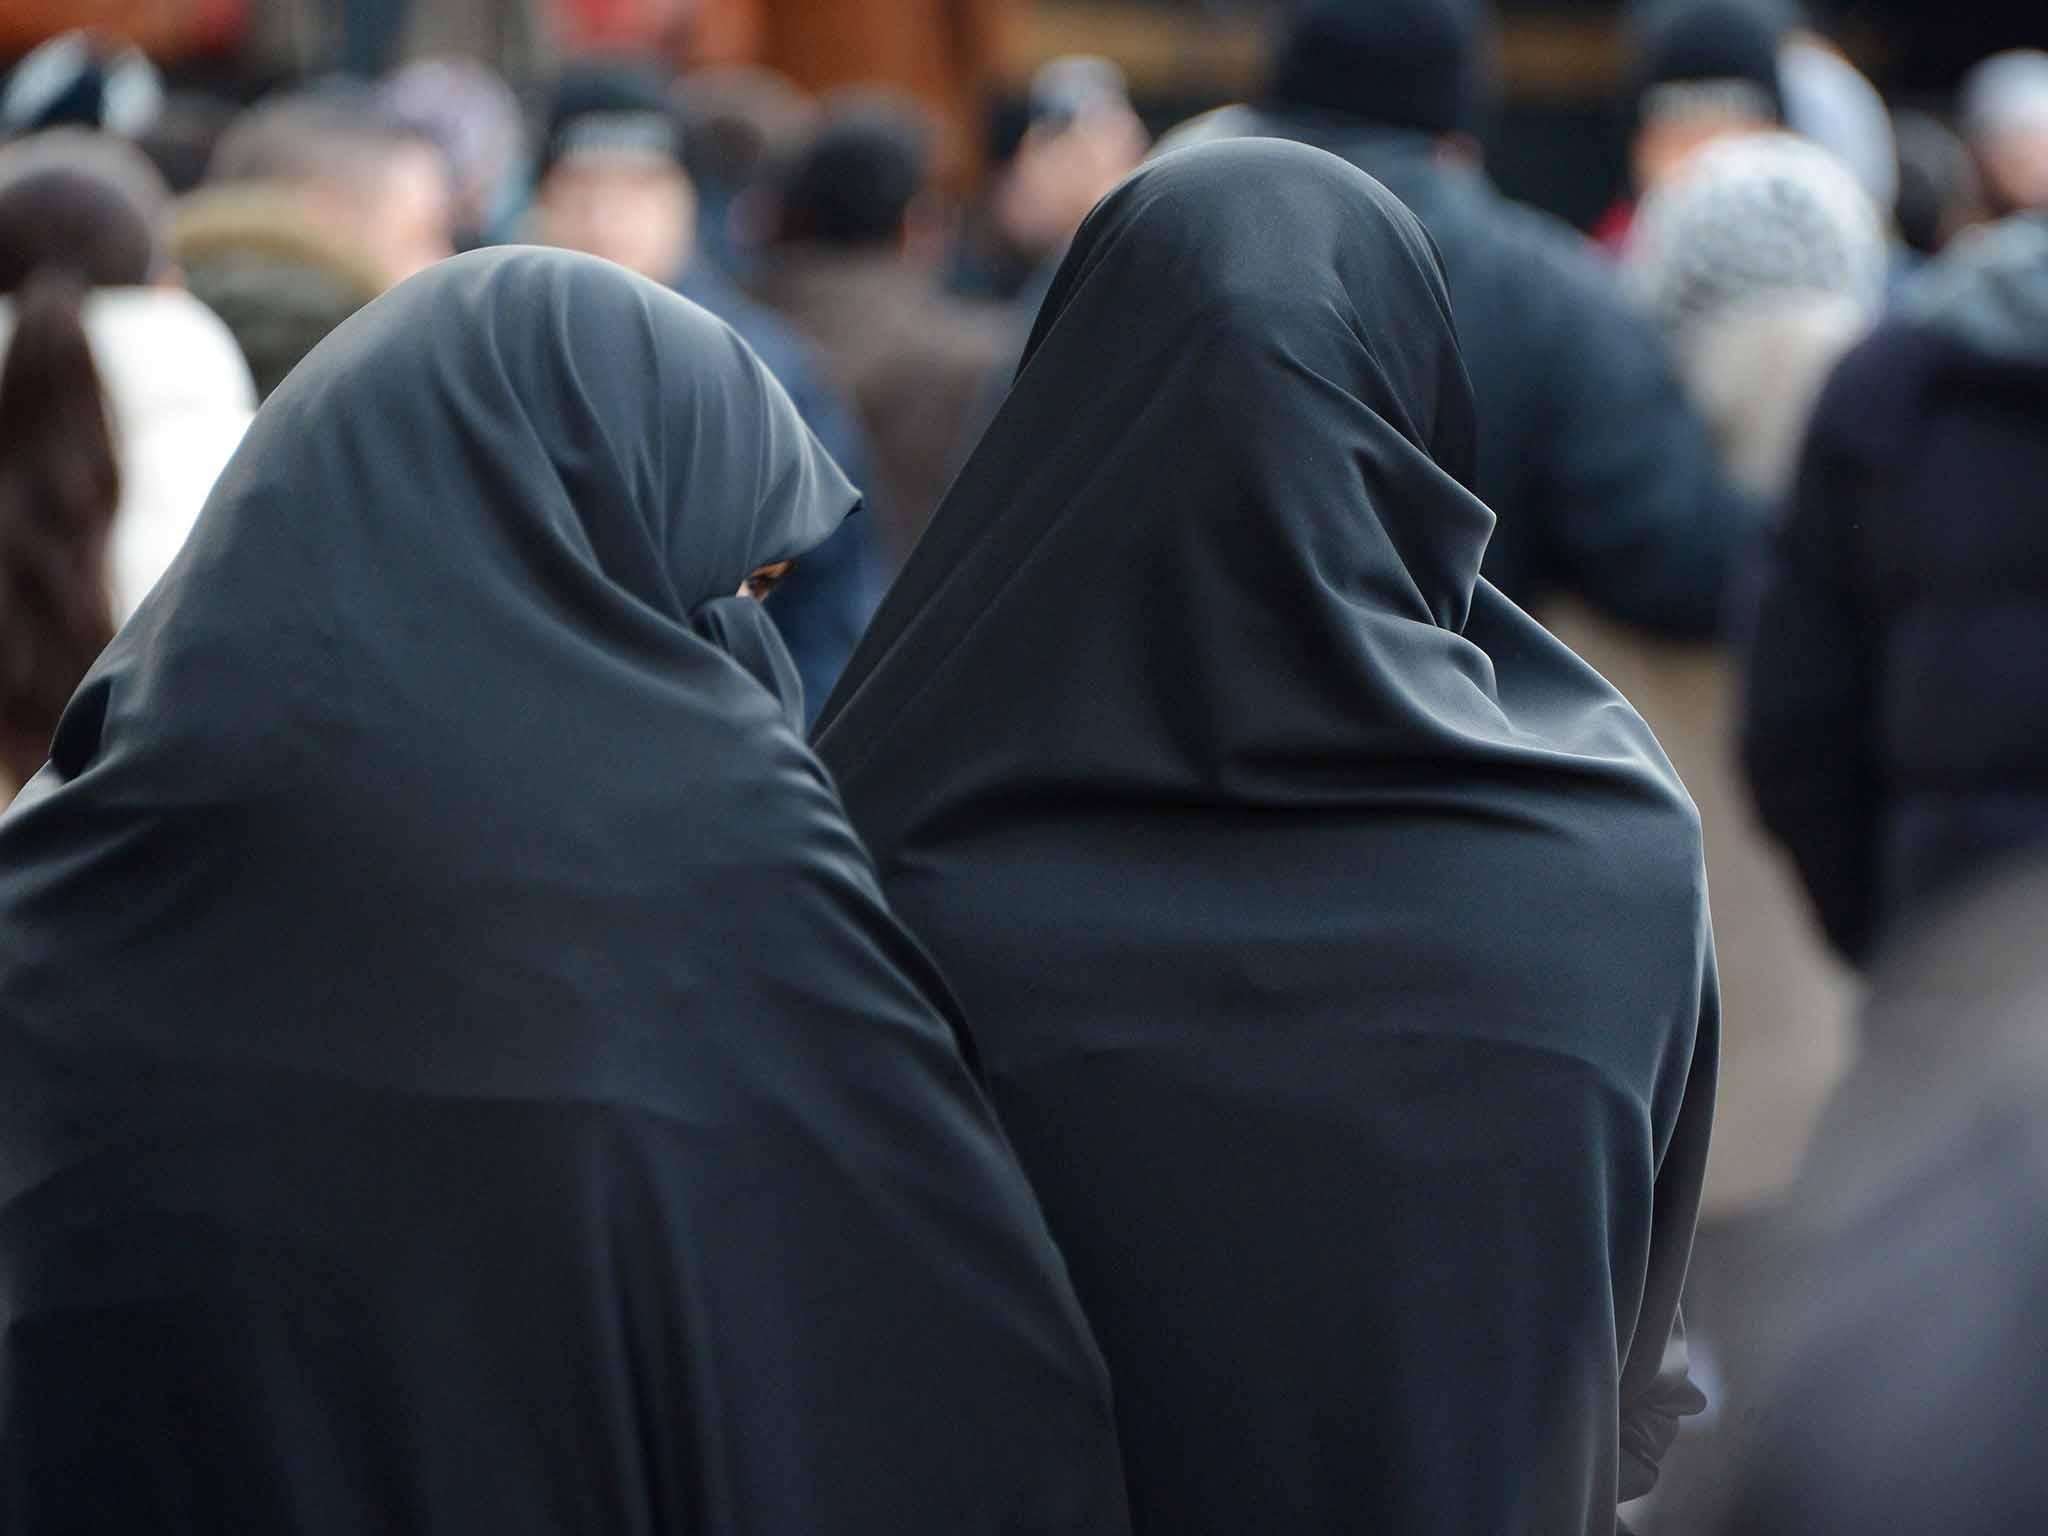 The deal included a ban on Muslim veils such as the burka and niqab, which cover all or most of the face